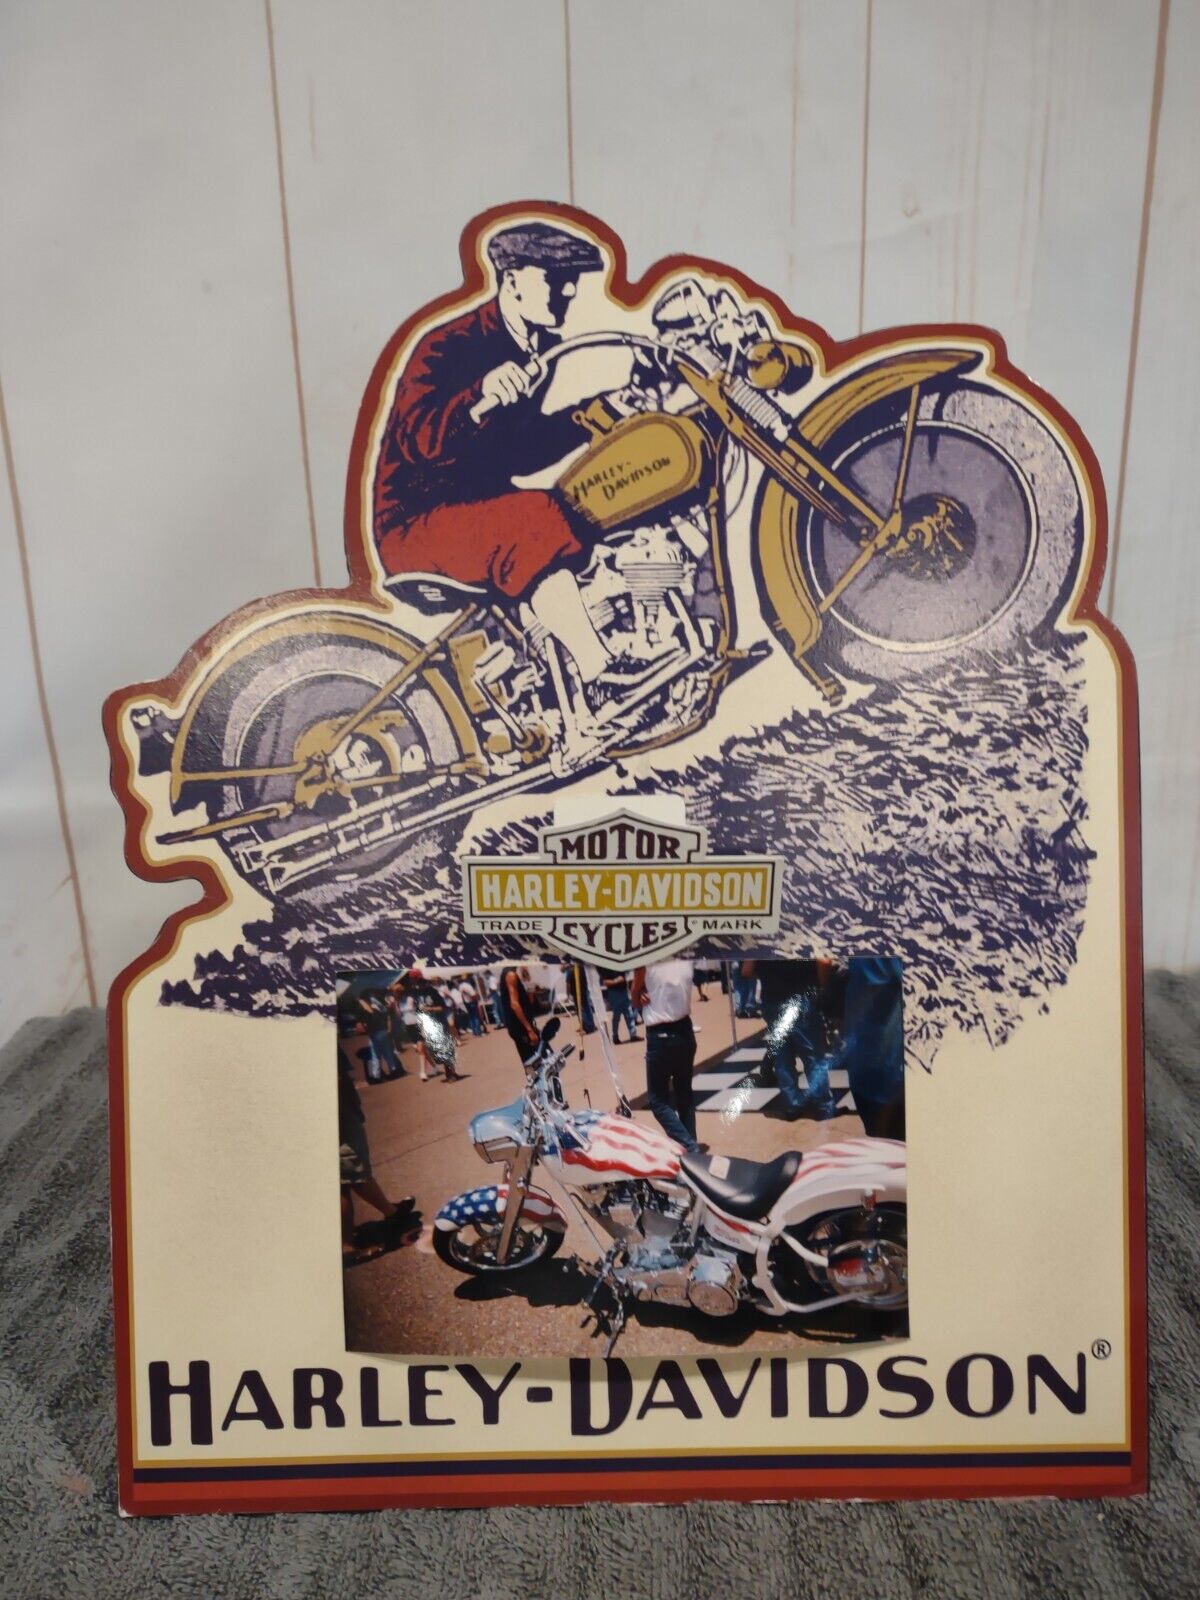 Harley Davidson Motorcycles Stand Up Clipboard Display Sign & Bike Picture 2003